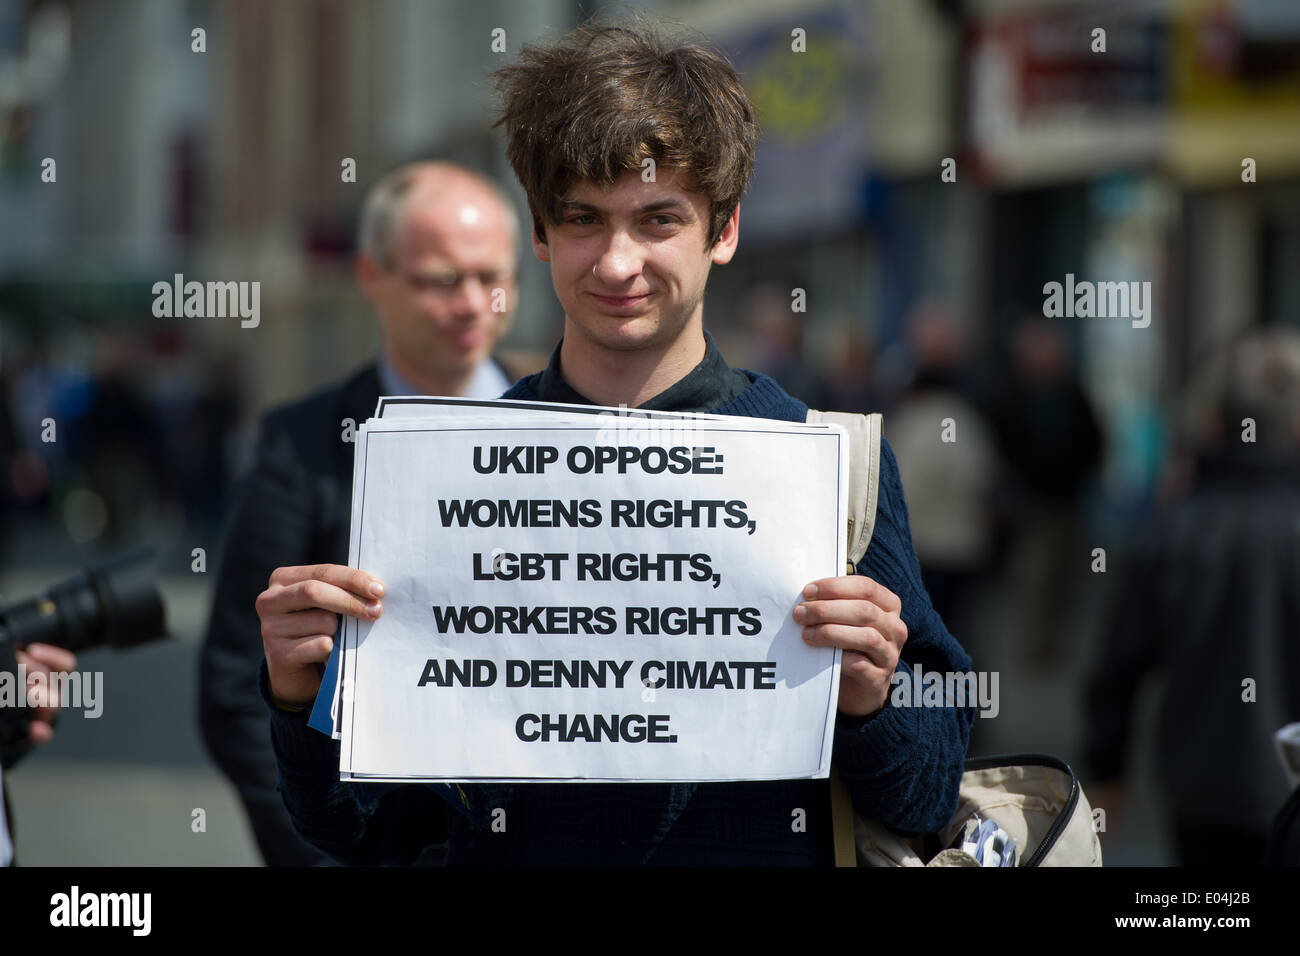 A young man protesting against UKIP policies in Swansea, UK, on the day of a UKIP supporters rally. Stock Photo